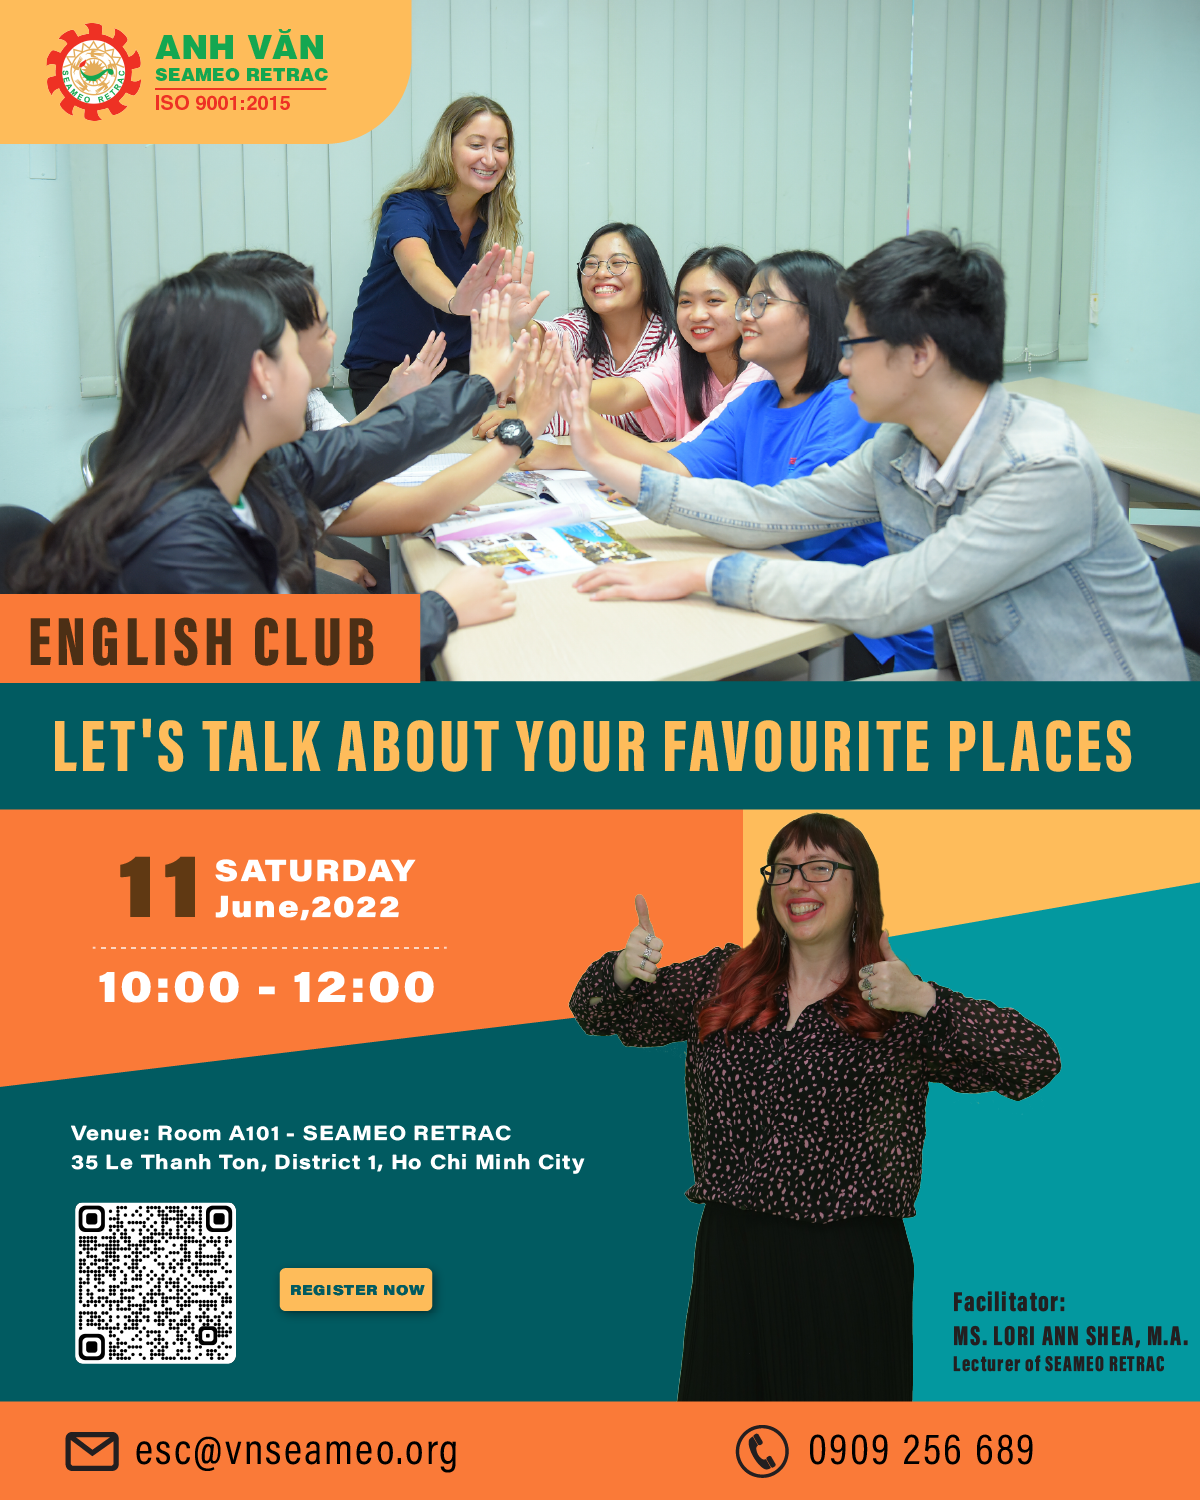 English club titled “Let’s talk about your favorite places”